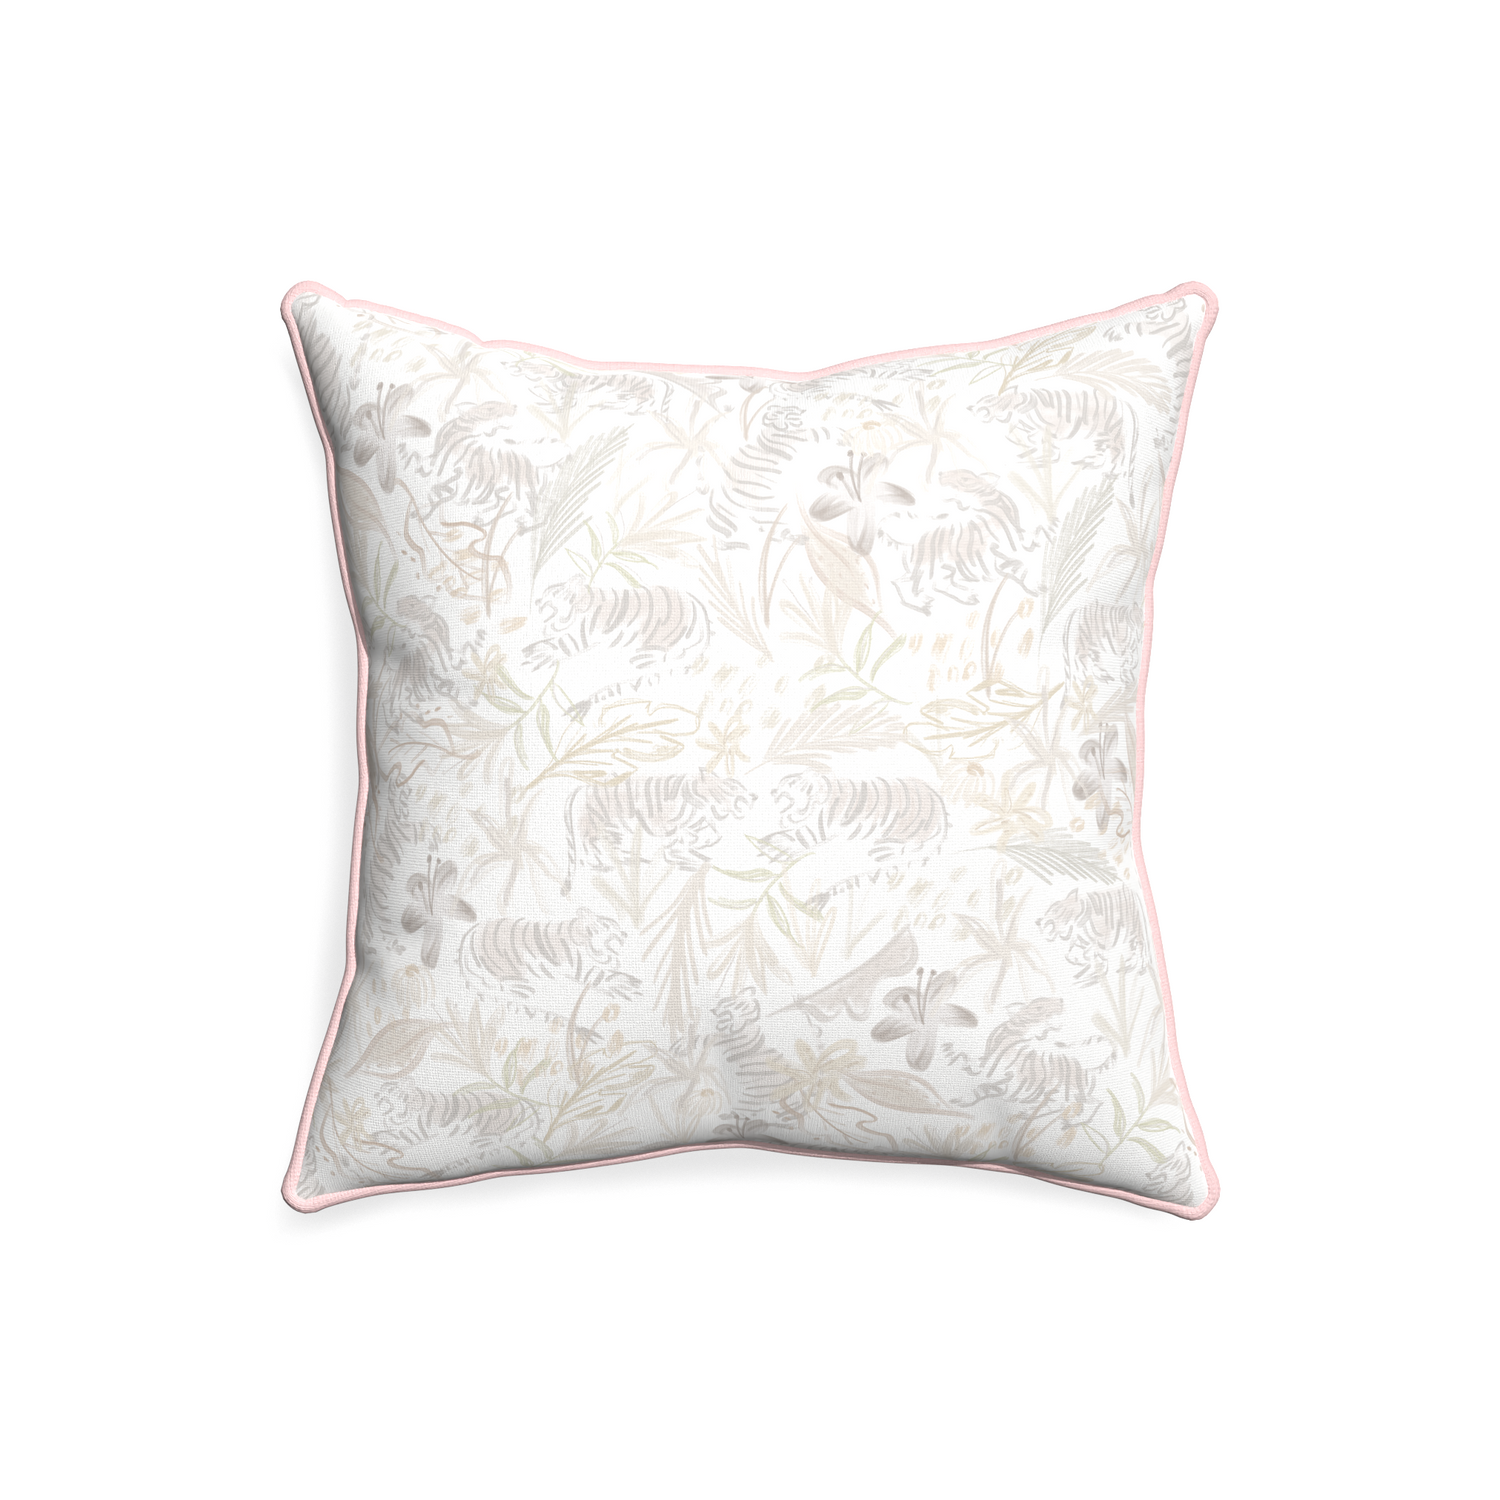 20-square frida sand custom pillow with petal piping on white background